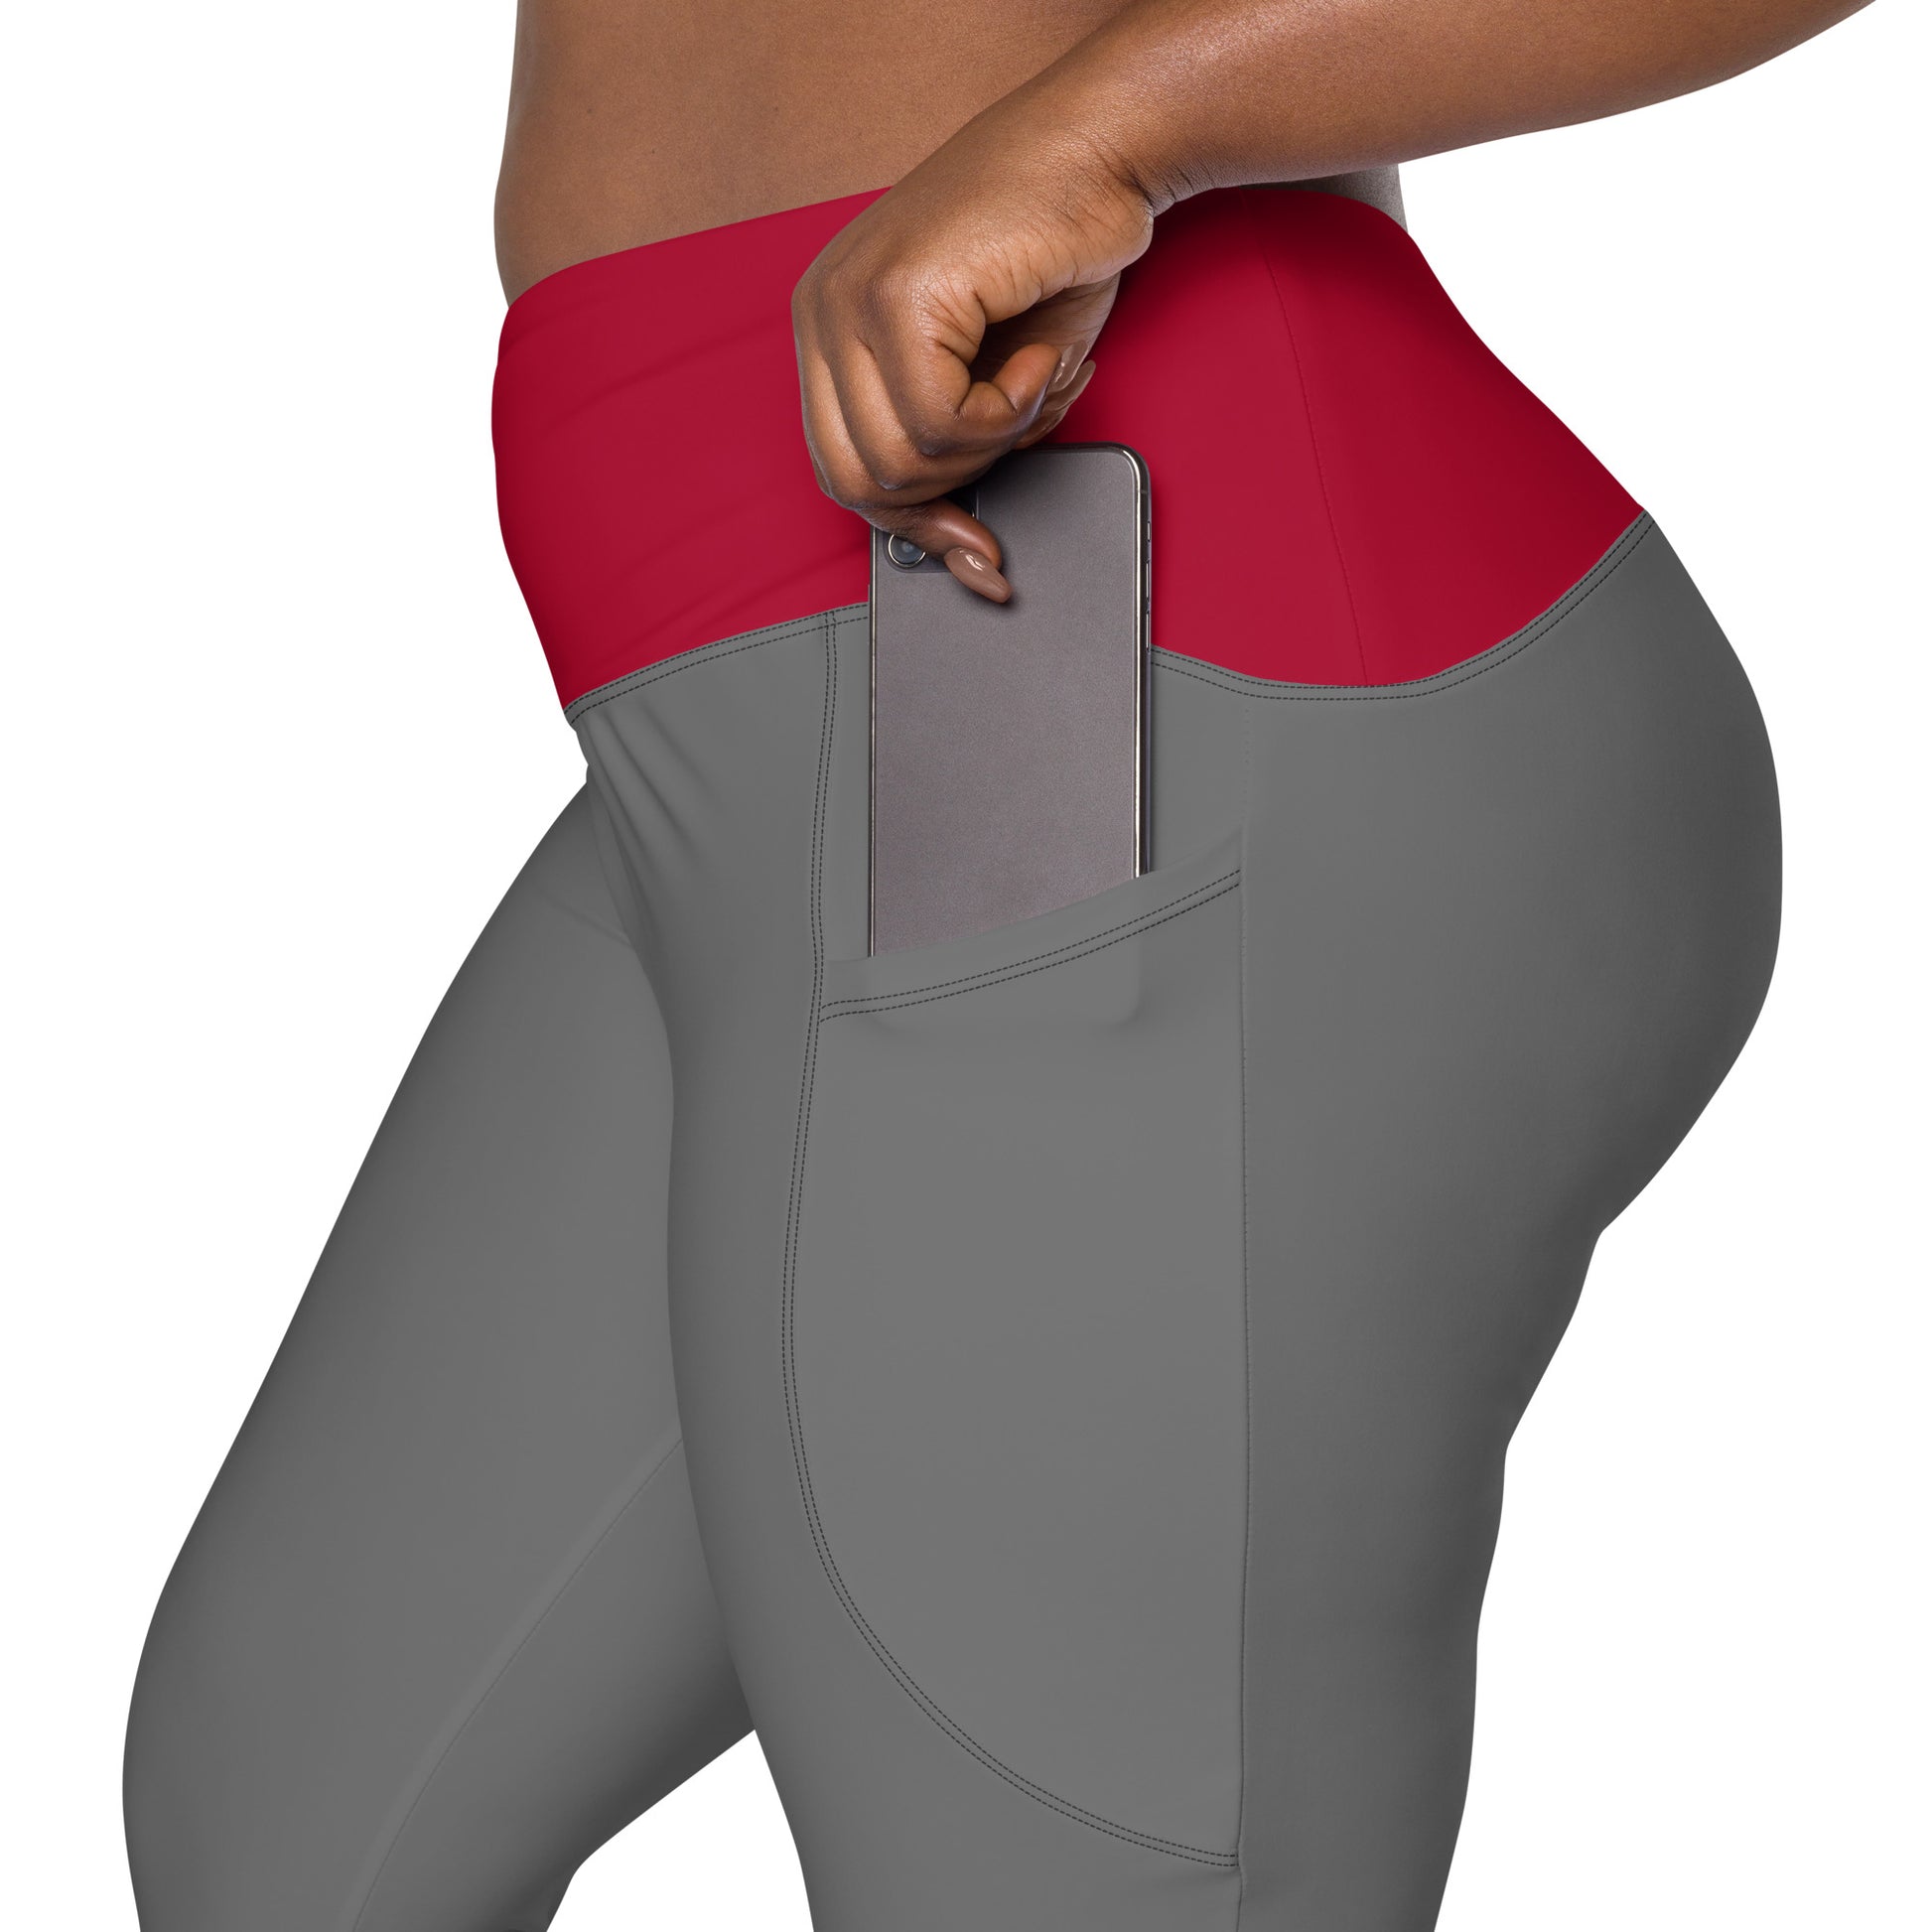 Grey And Red Crossover Leggings With Pockets